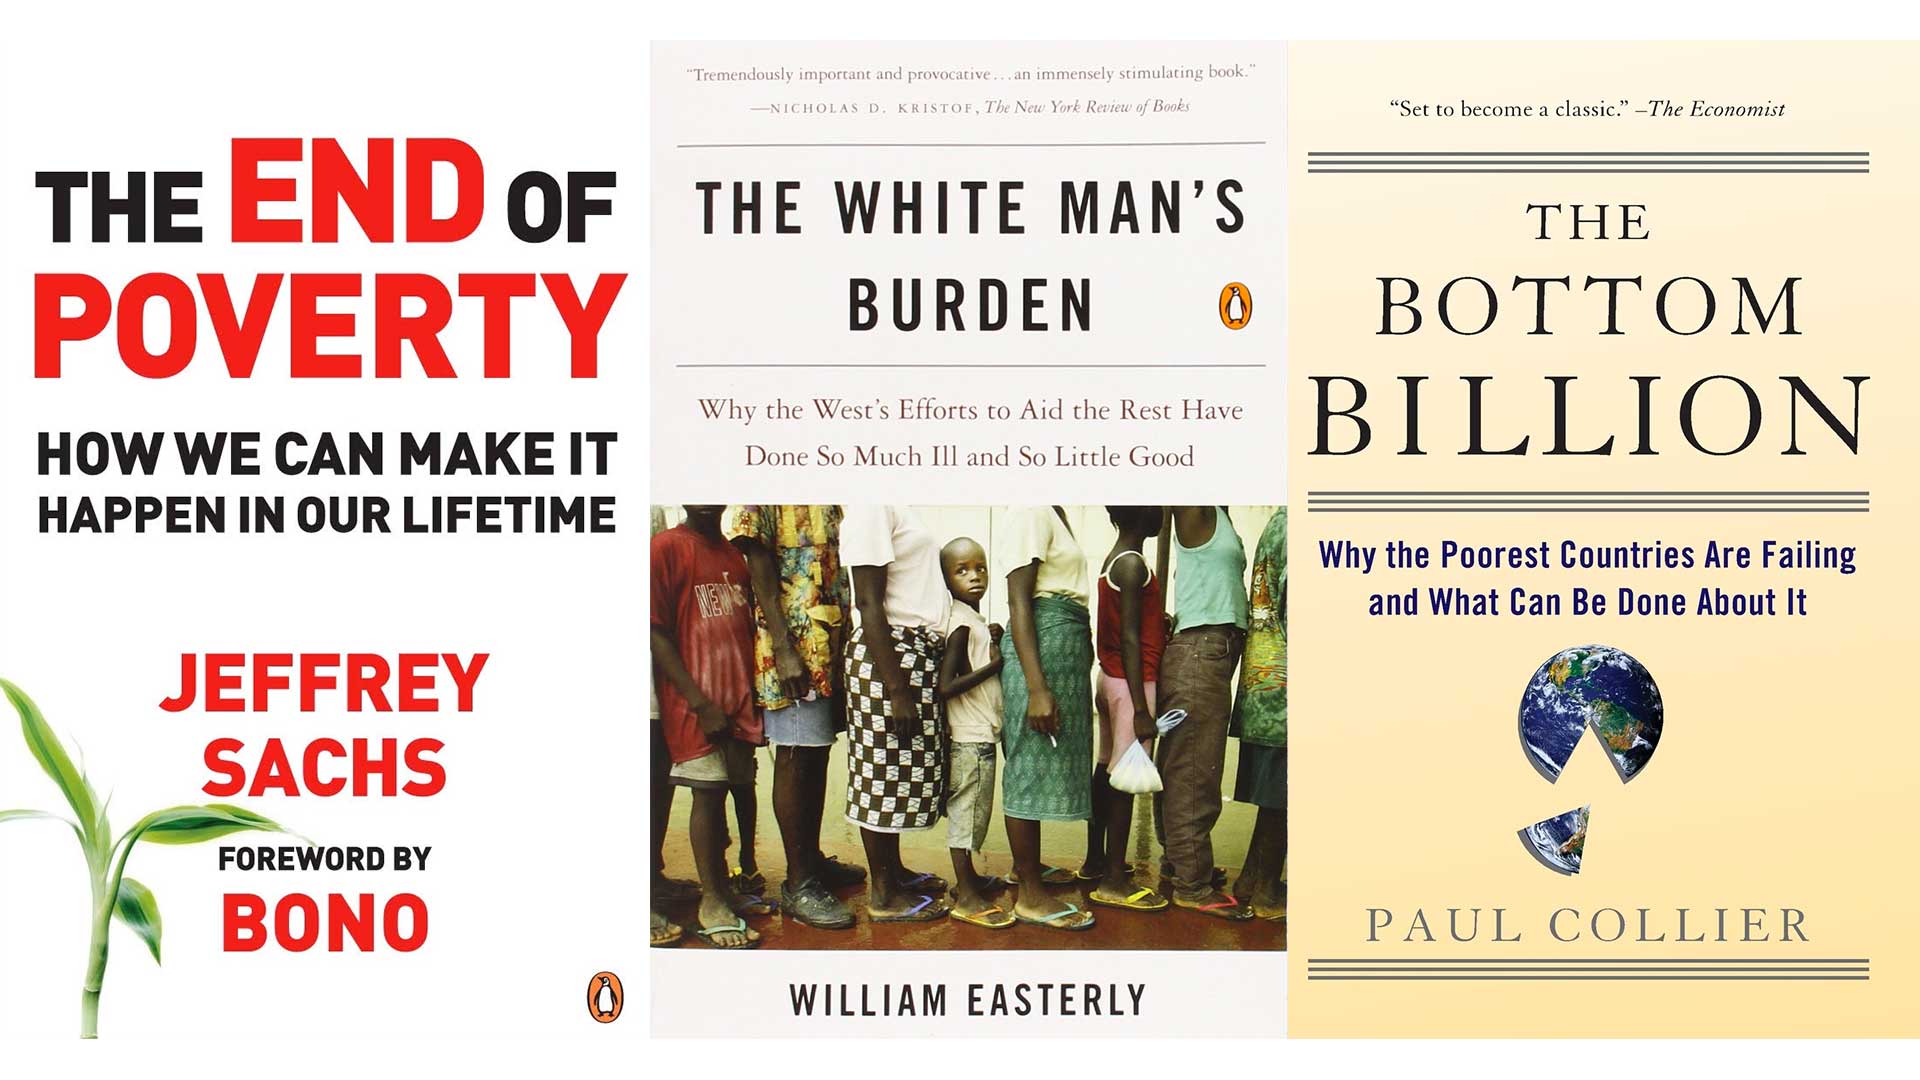 Three books: The End of Poverty by Jeffrey Sachs, The White Man's Burden by William Easterly, and The Bottom Billion by Paul Collier.